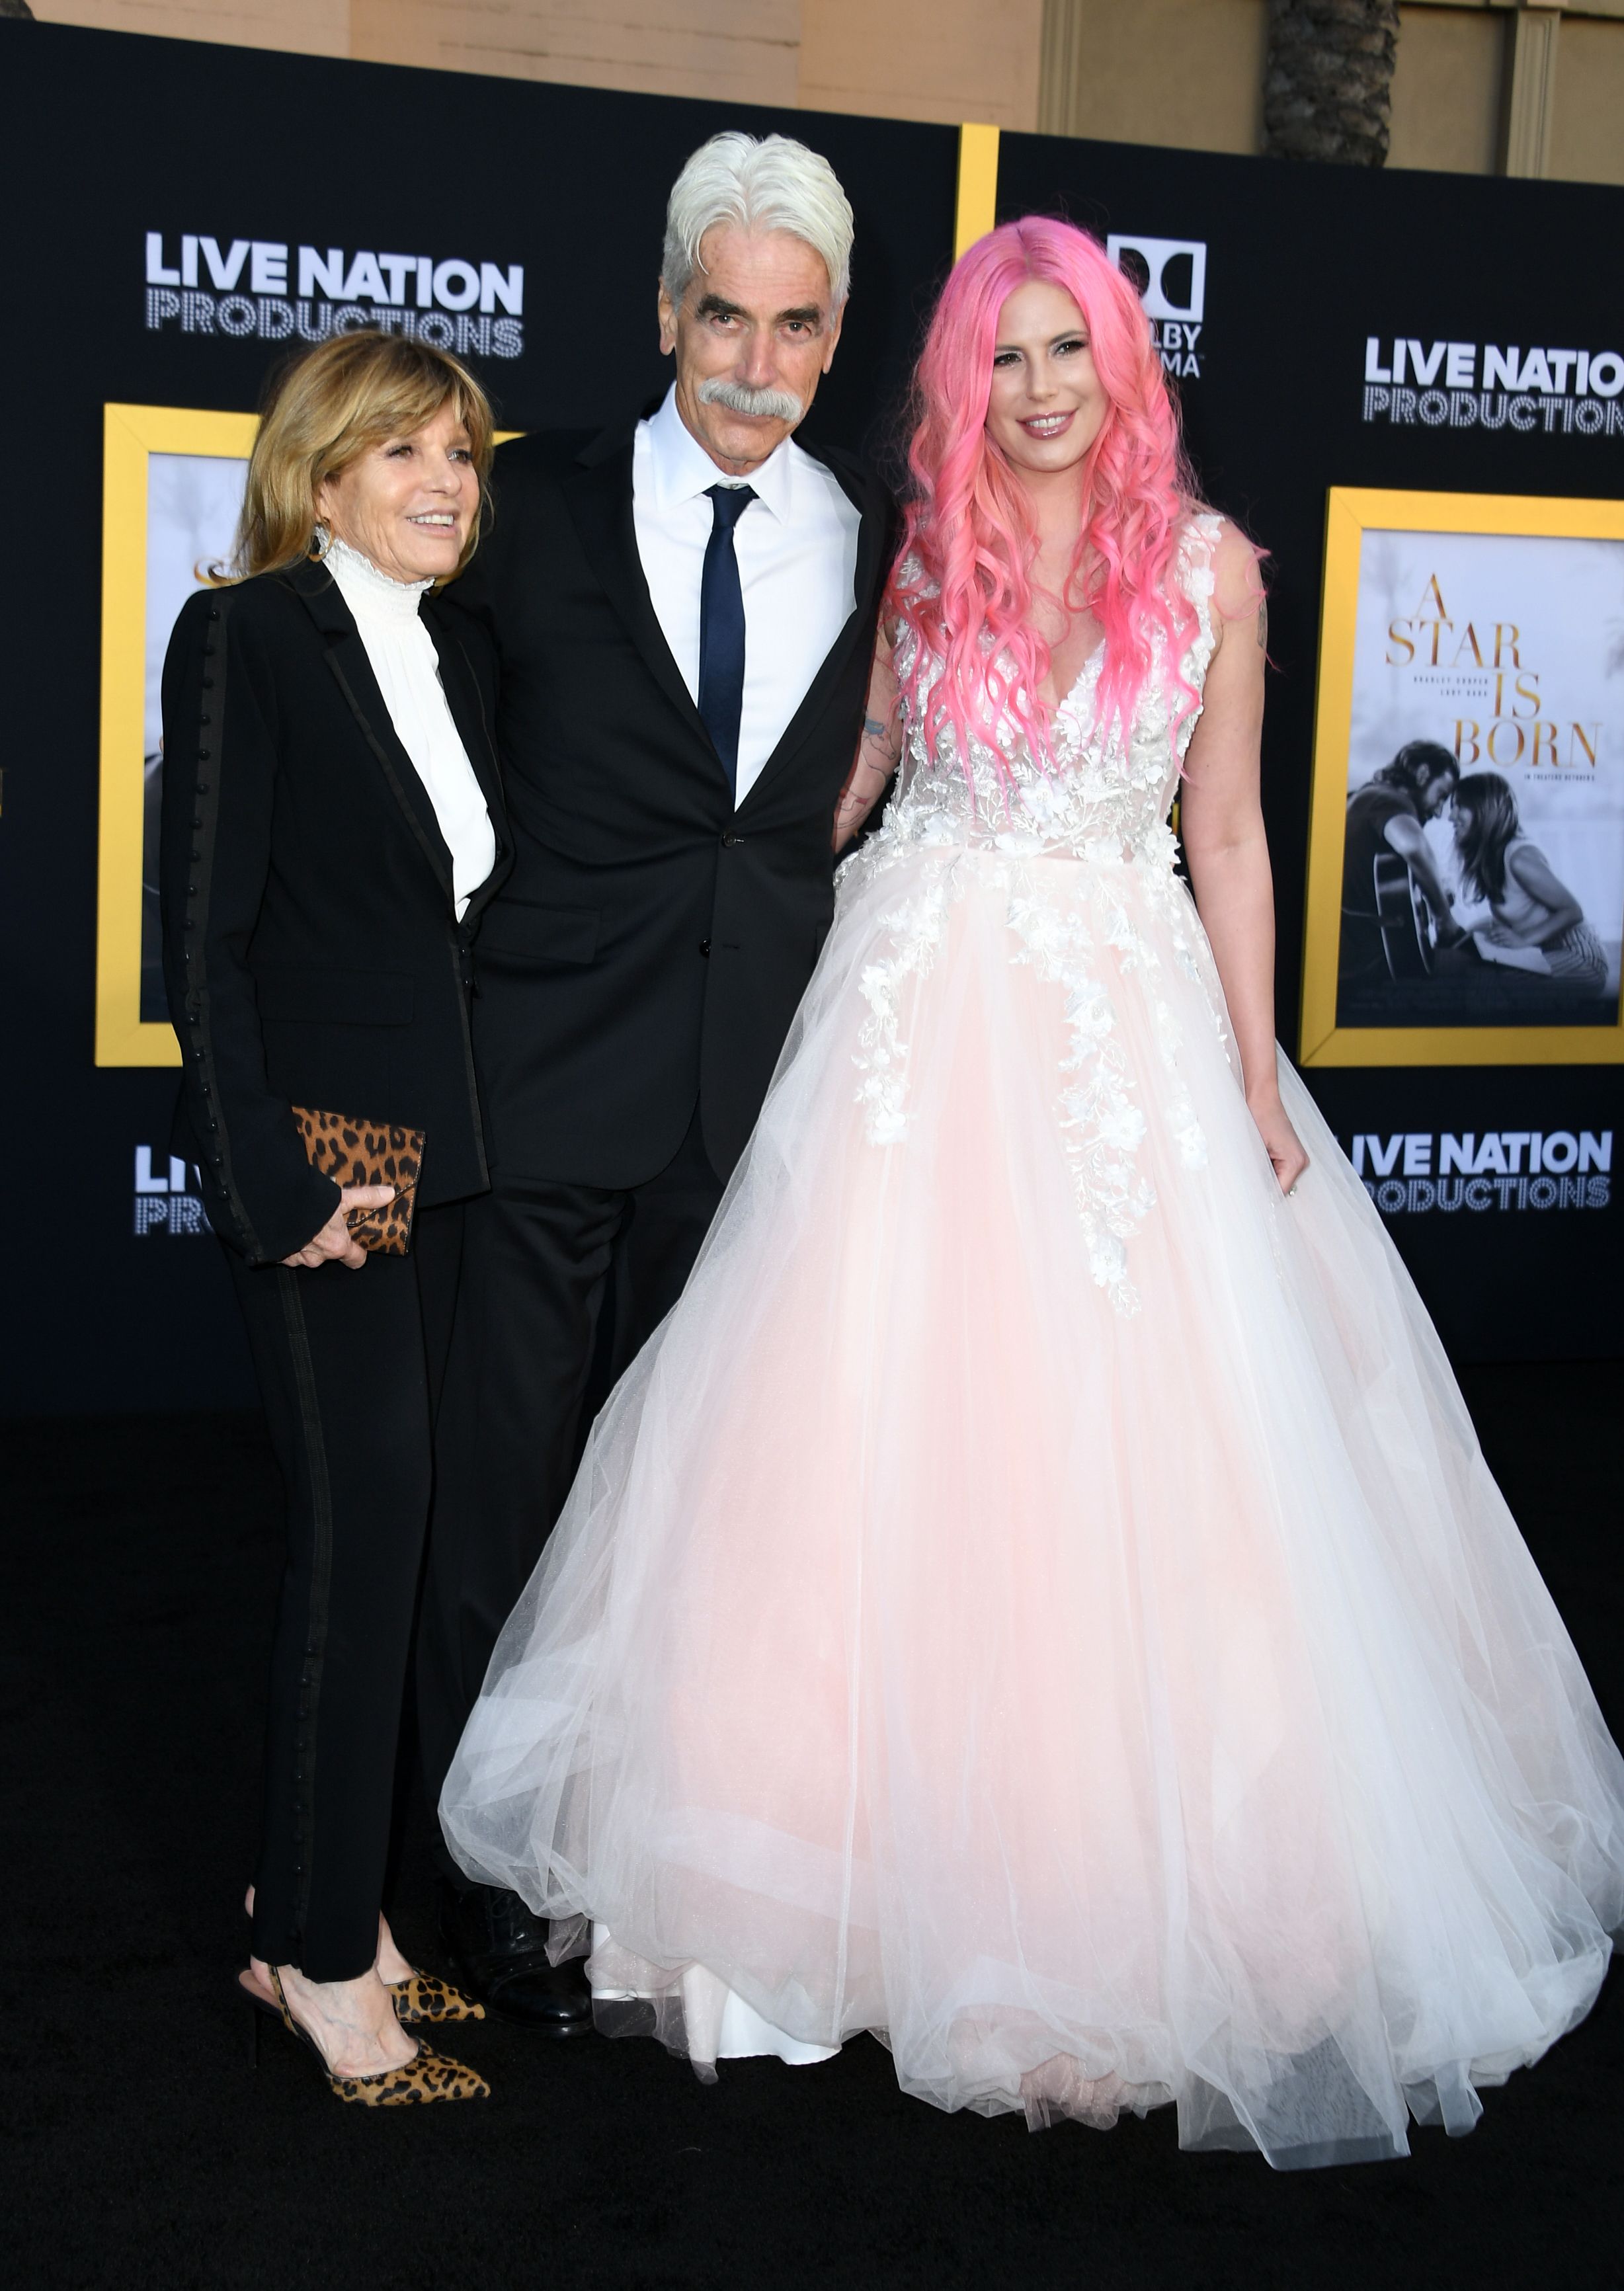 Katharine Ross, Sam Elliott, and their daughter Cleo Rose Elliott at the premiere of "A star is born" in Los Angeles, California, on September 24, 2018 | Source: Getty Images